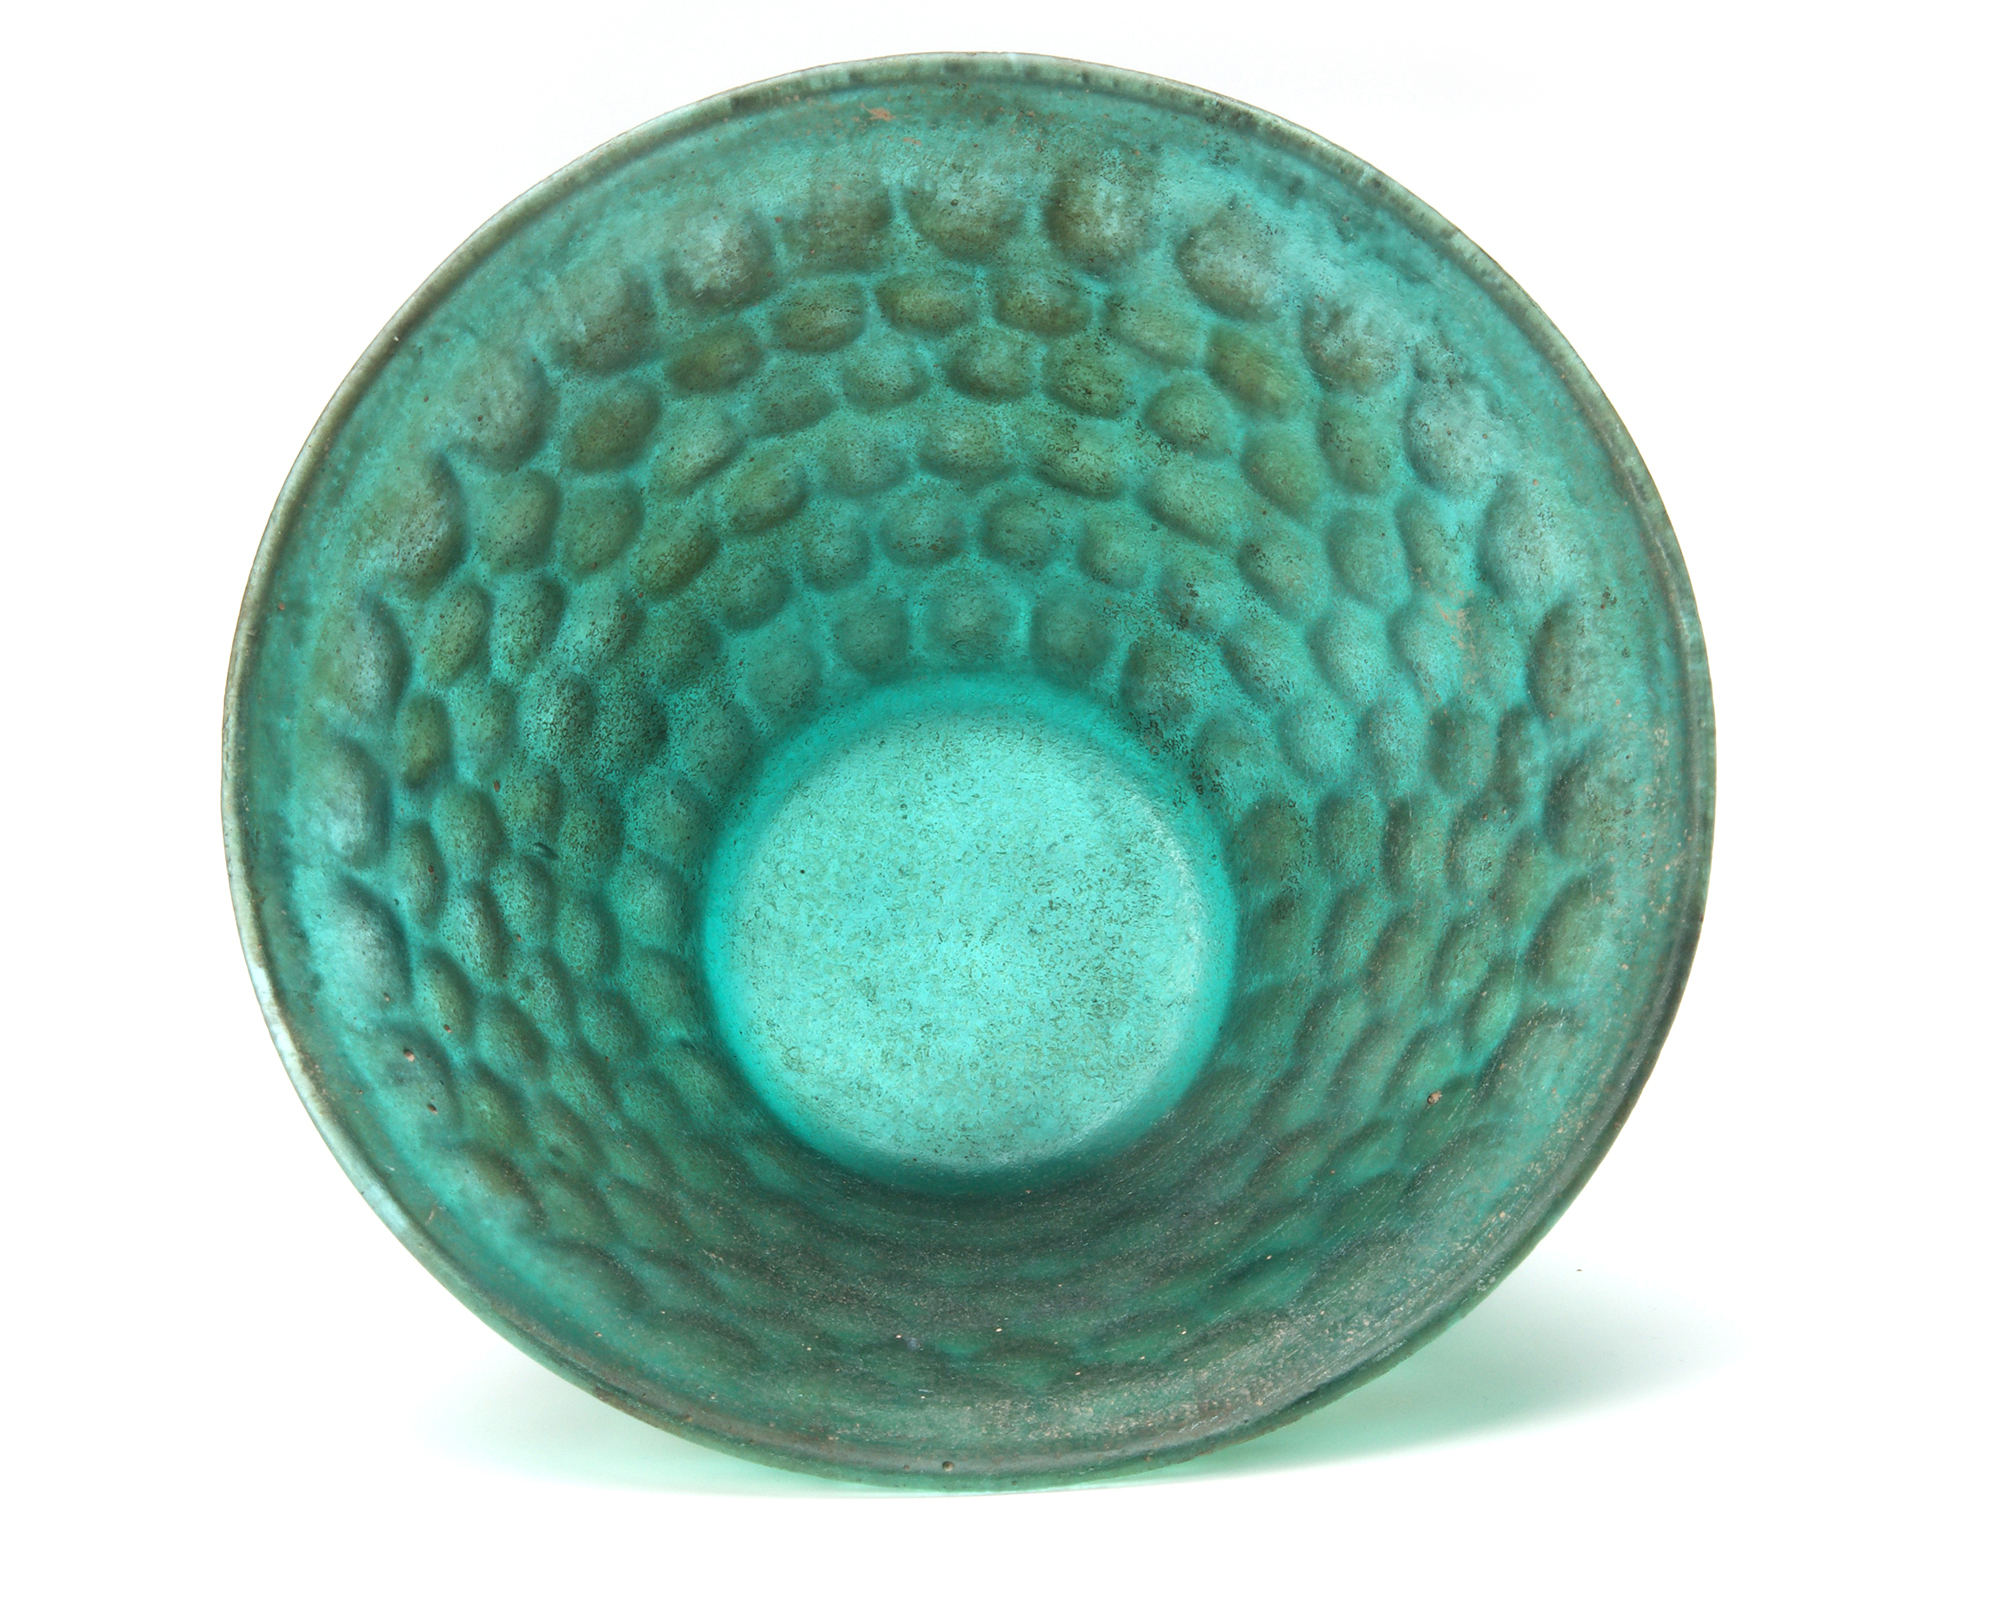 A PERSIAN GREEN CUT GLASS BOWL, 8TH-9TH CENTURY - Image 10 of 10